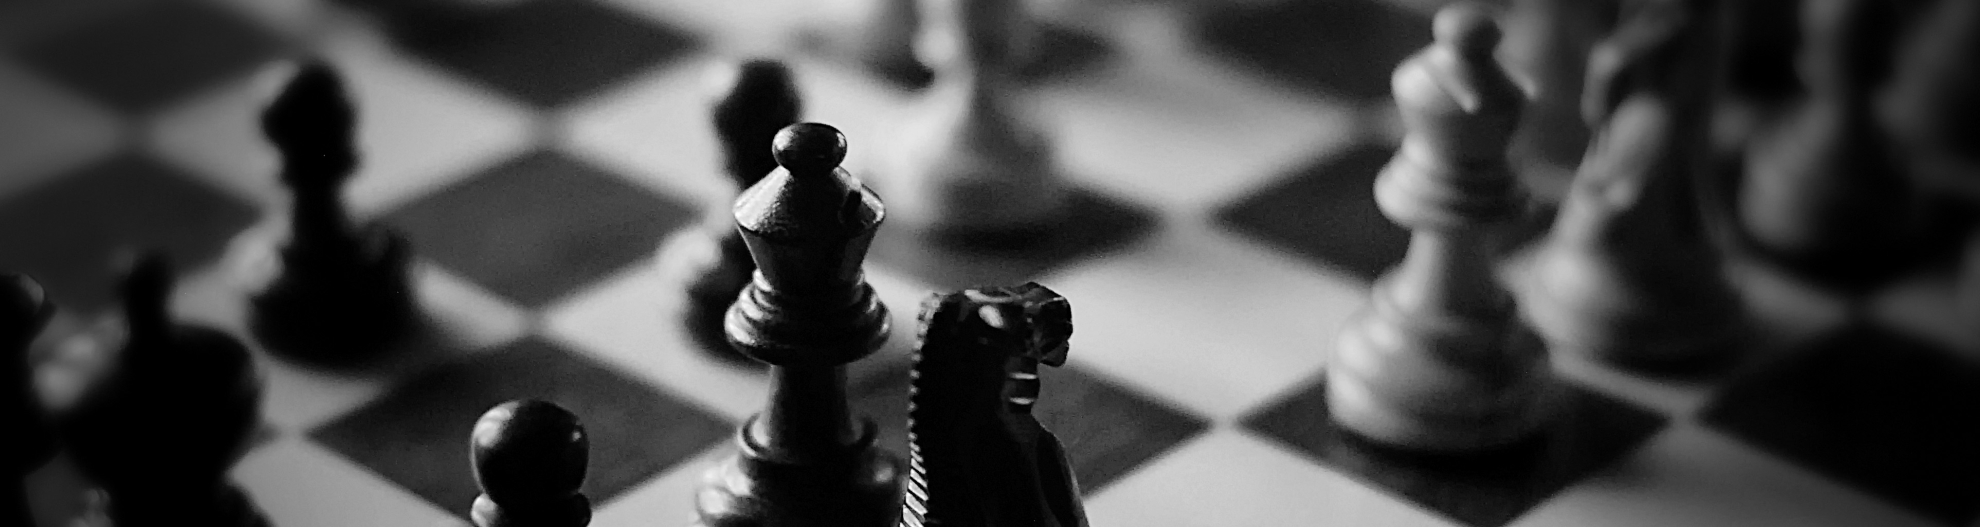 Game of chess in black and white